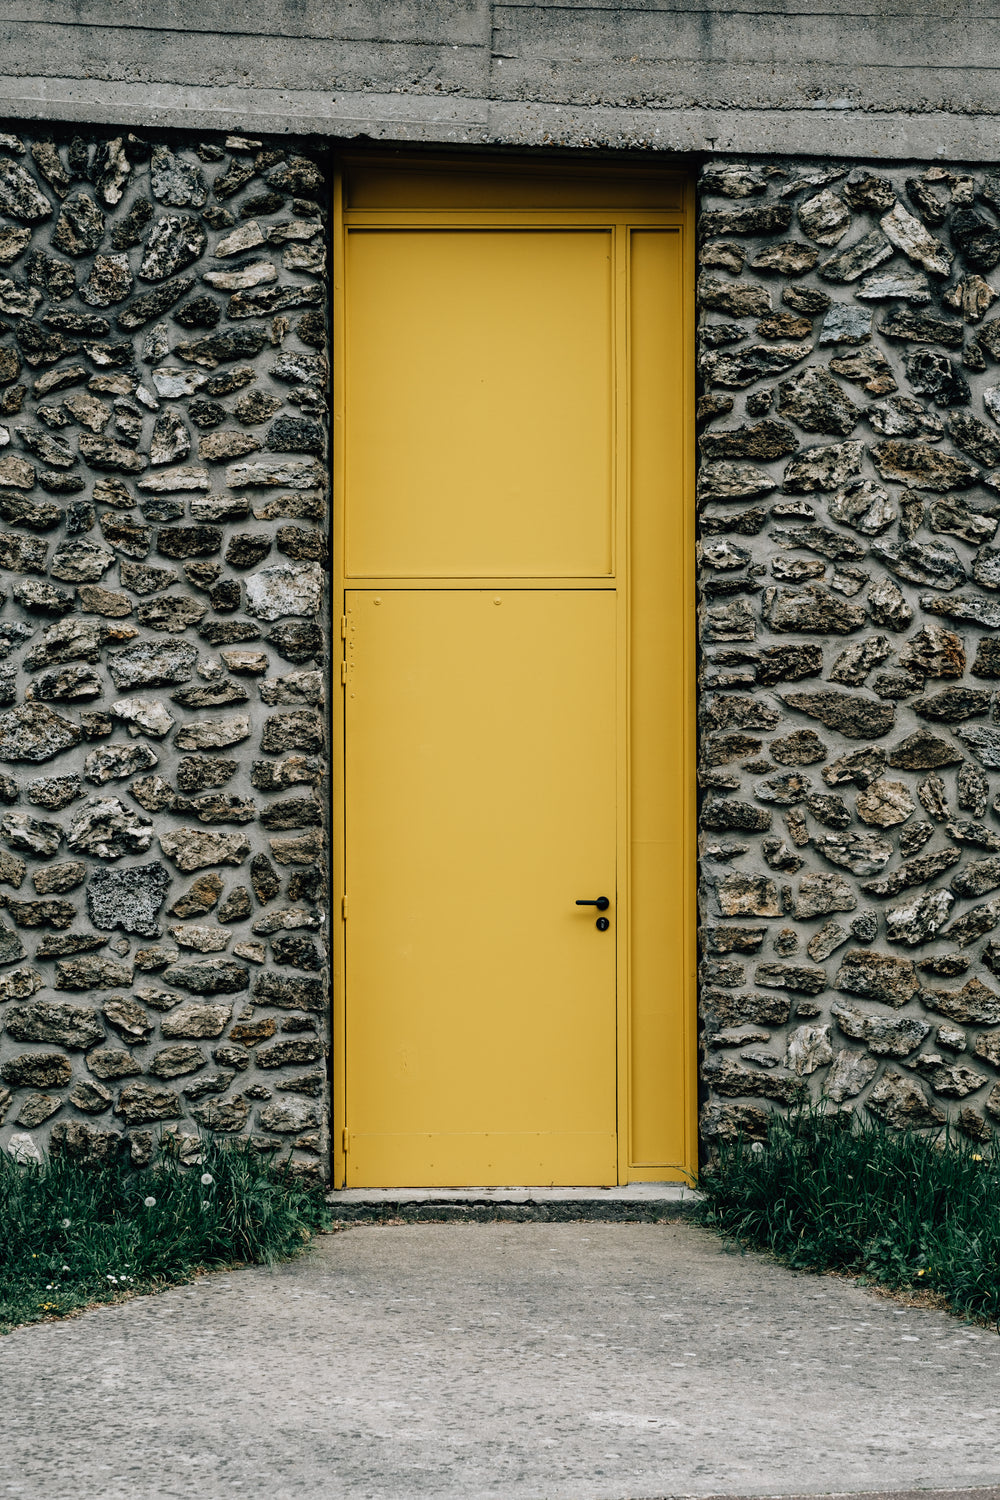 stone building with a thin bright yellow door